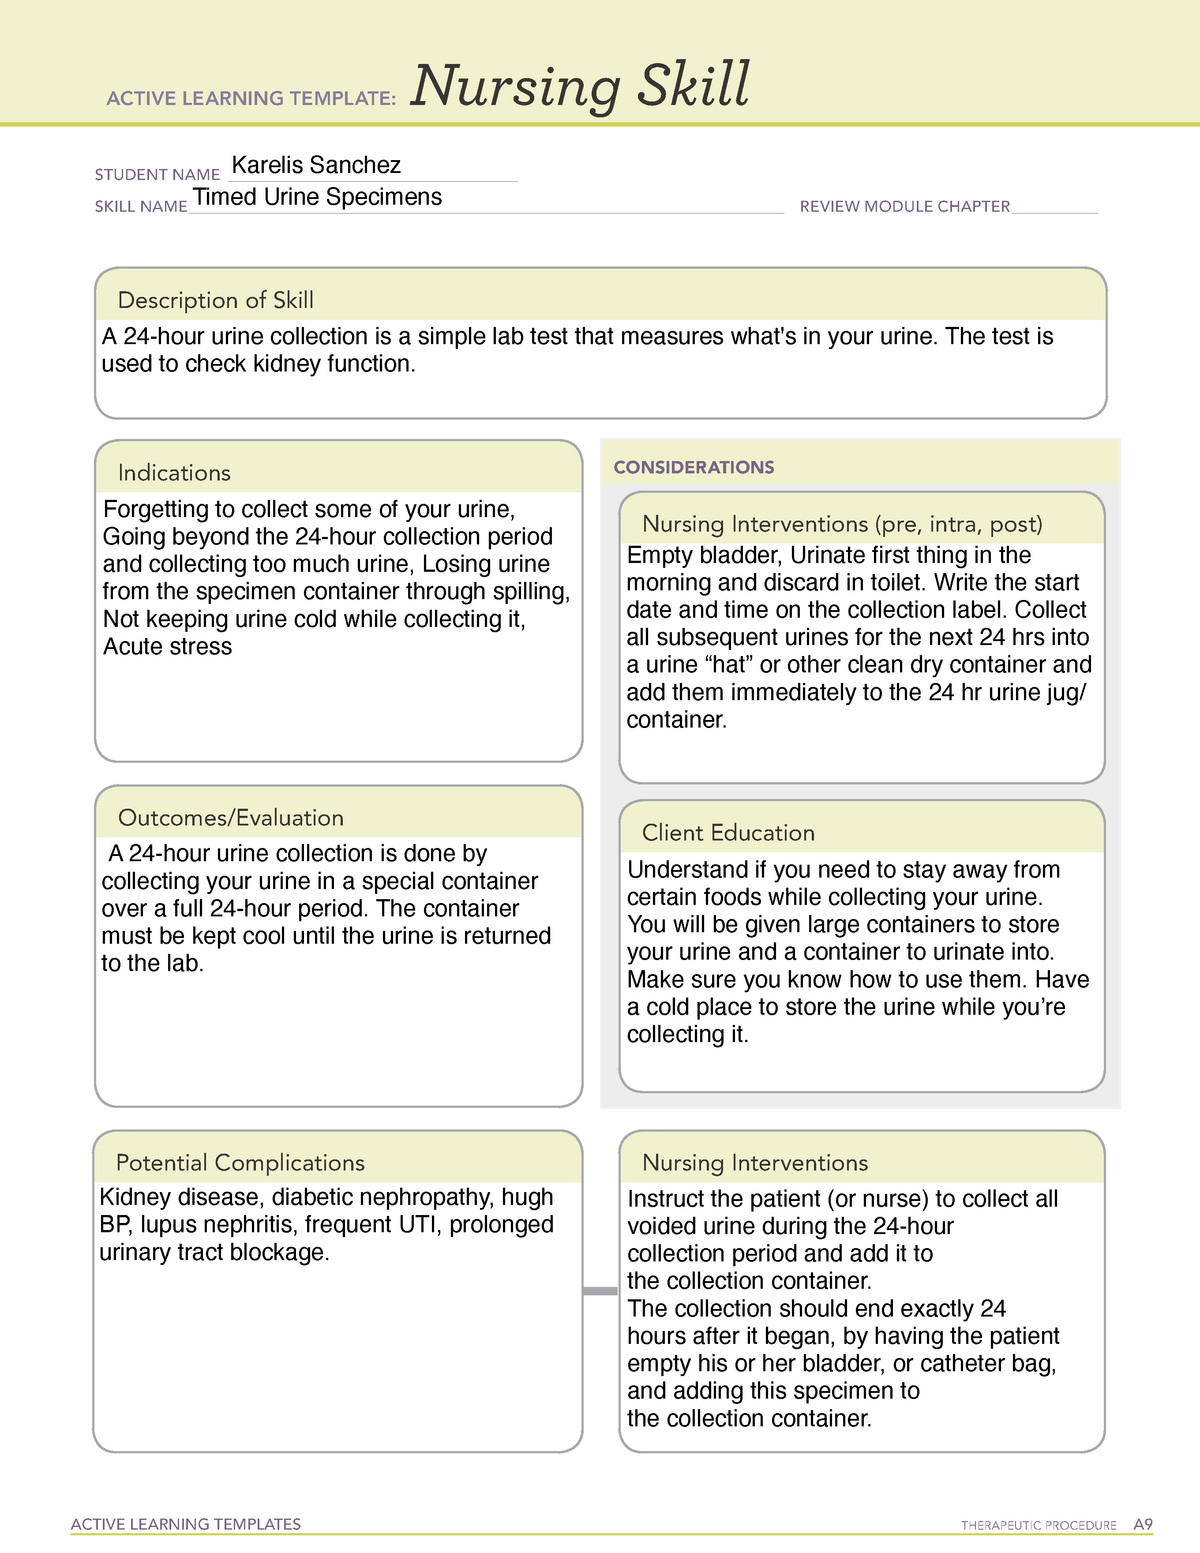 ALT Nursing Skill Active Learning Template ACTIVE LEARNING